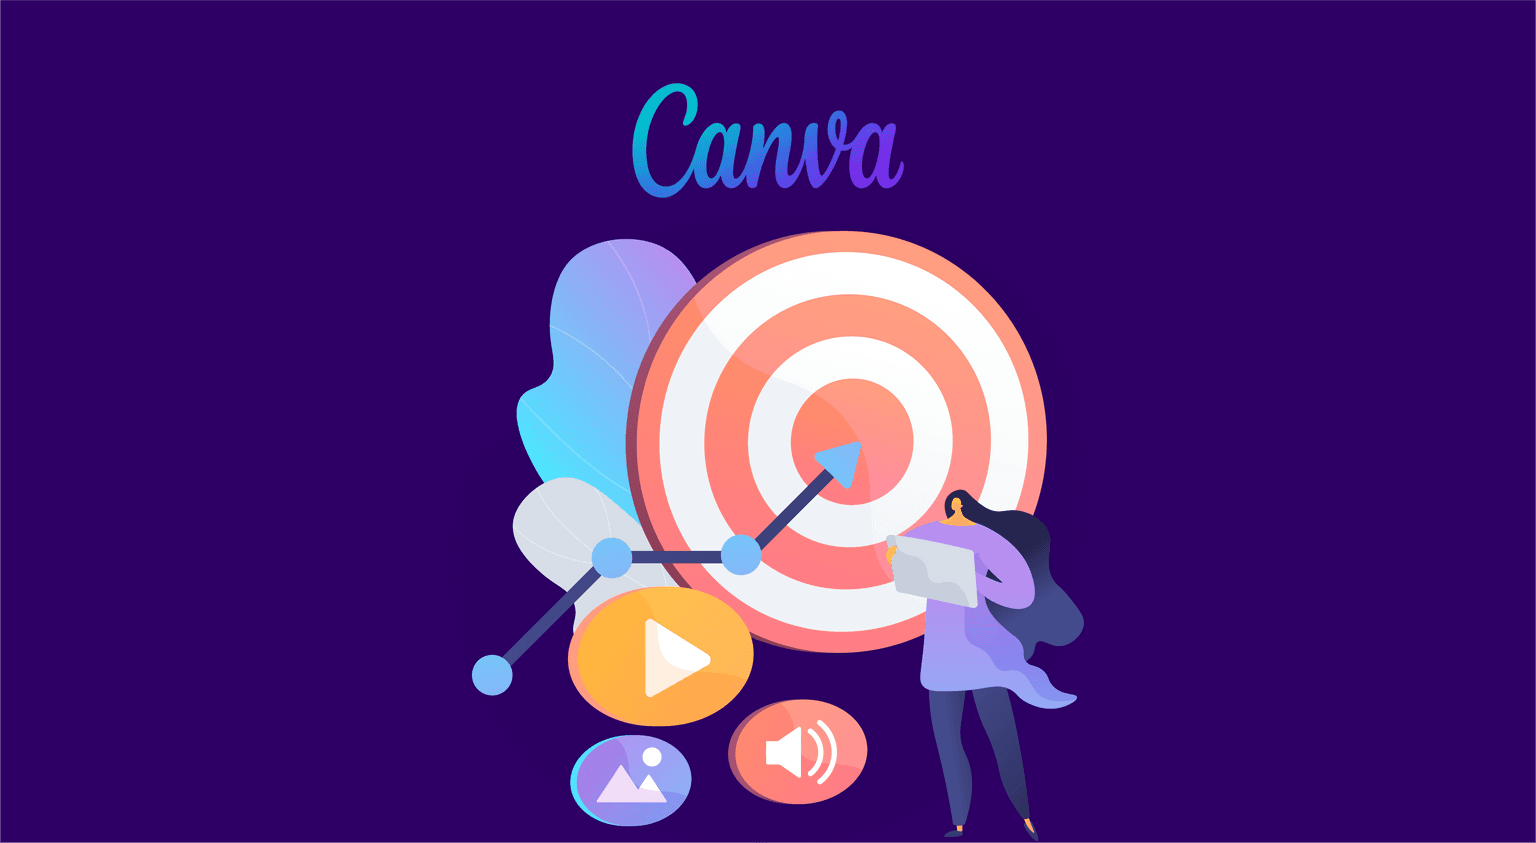 10 Reasons Why Canva’s Content Marketing Has Seen Success